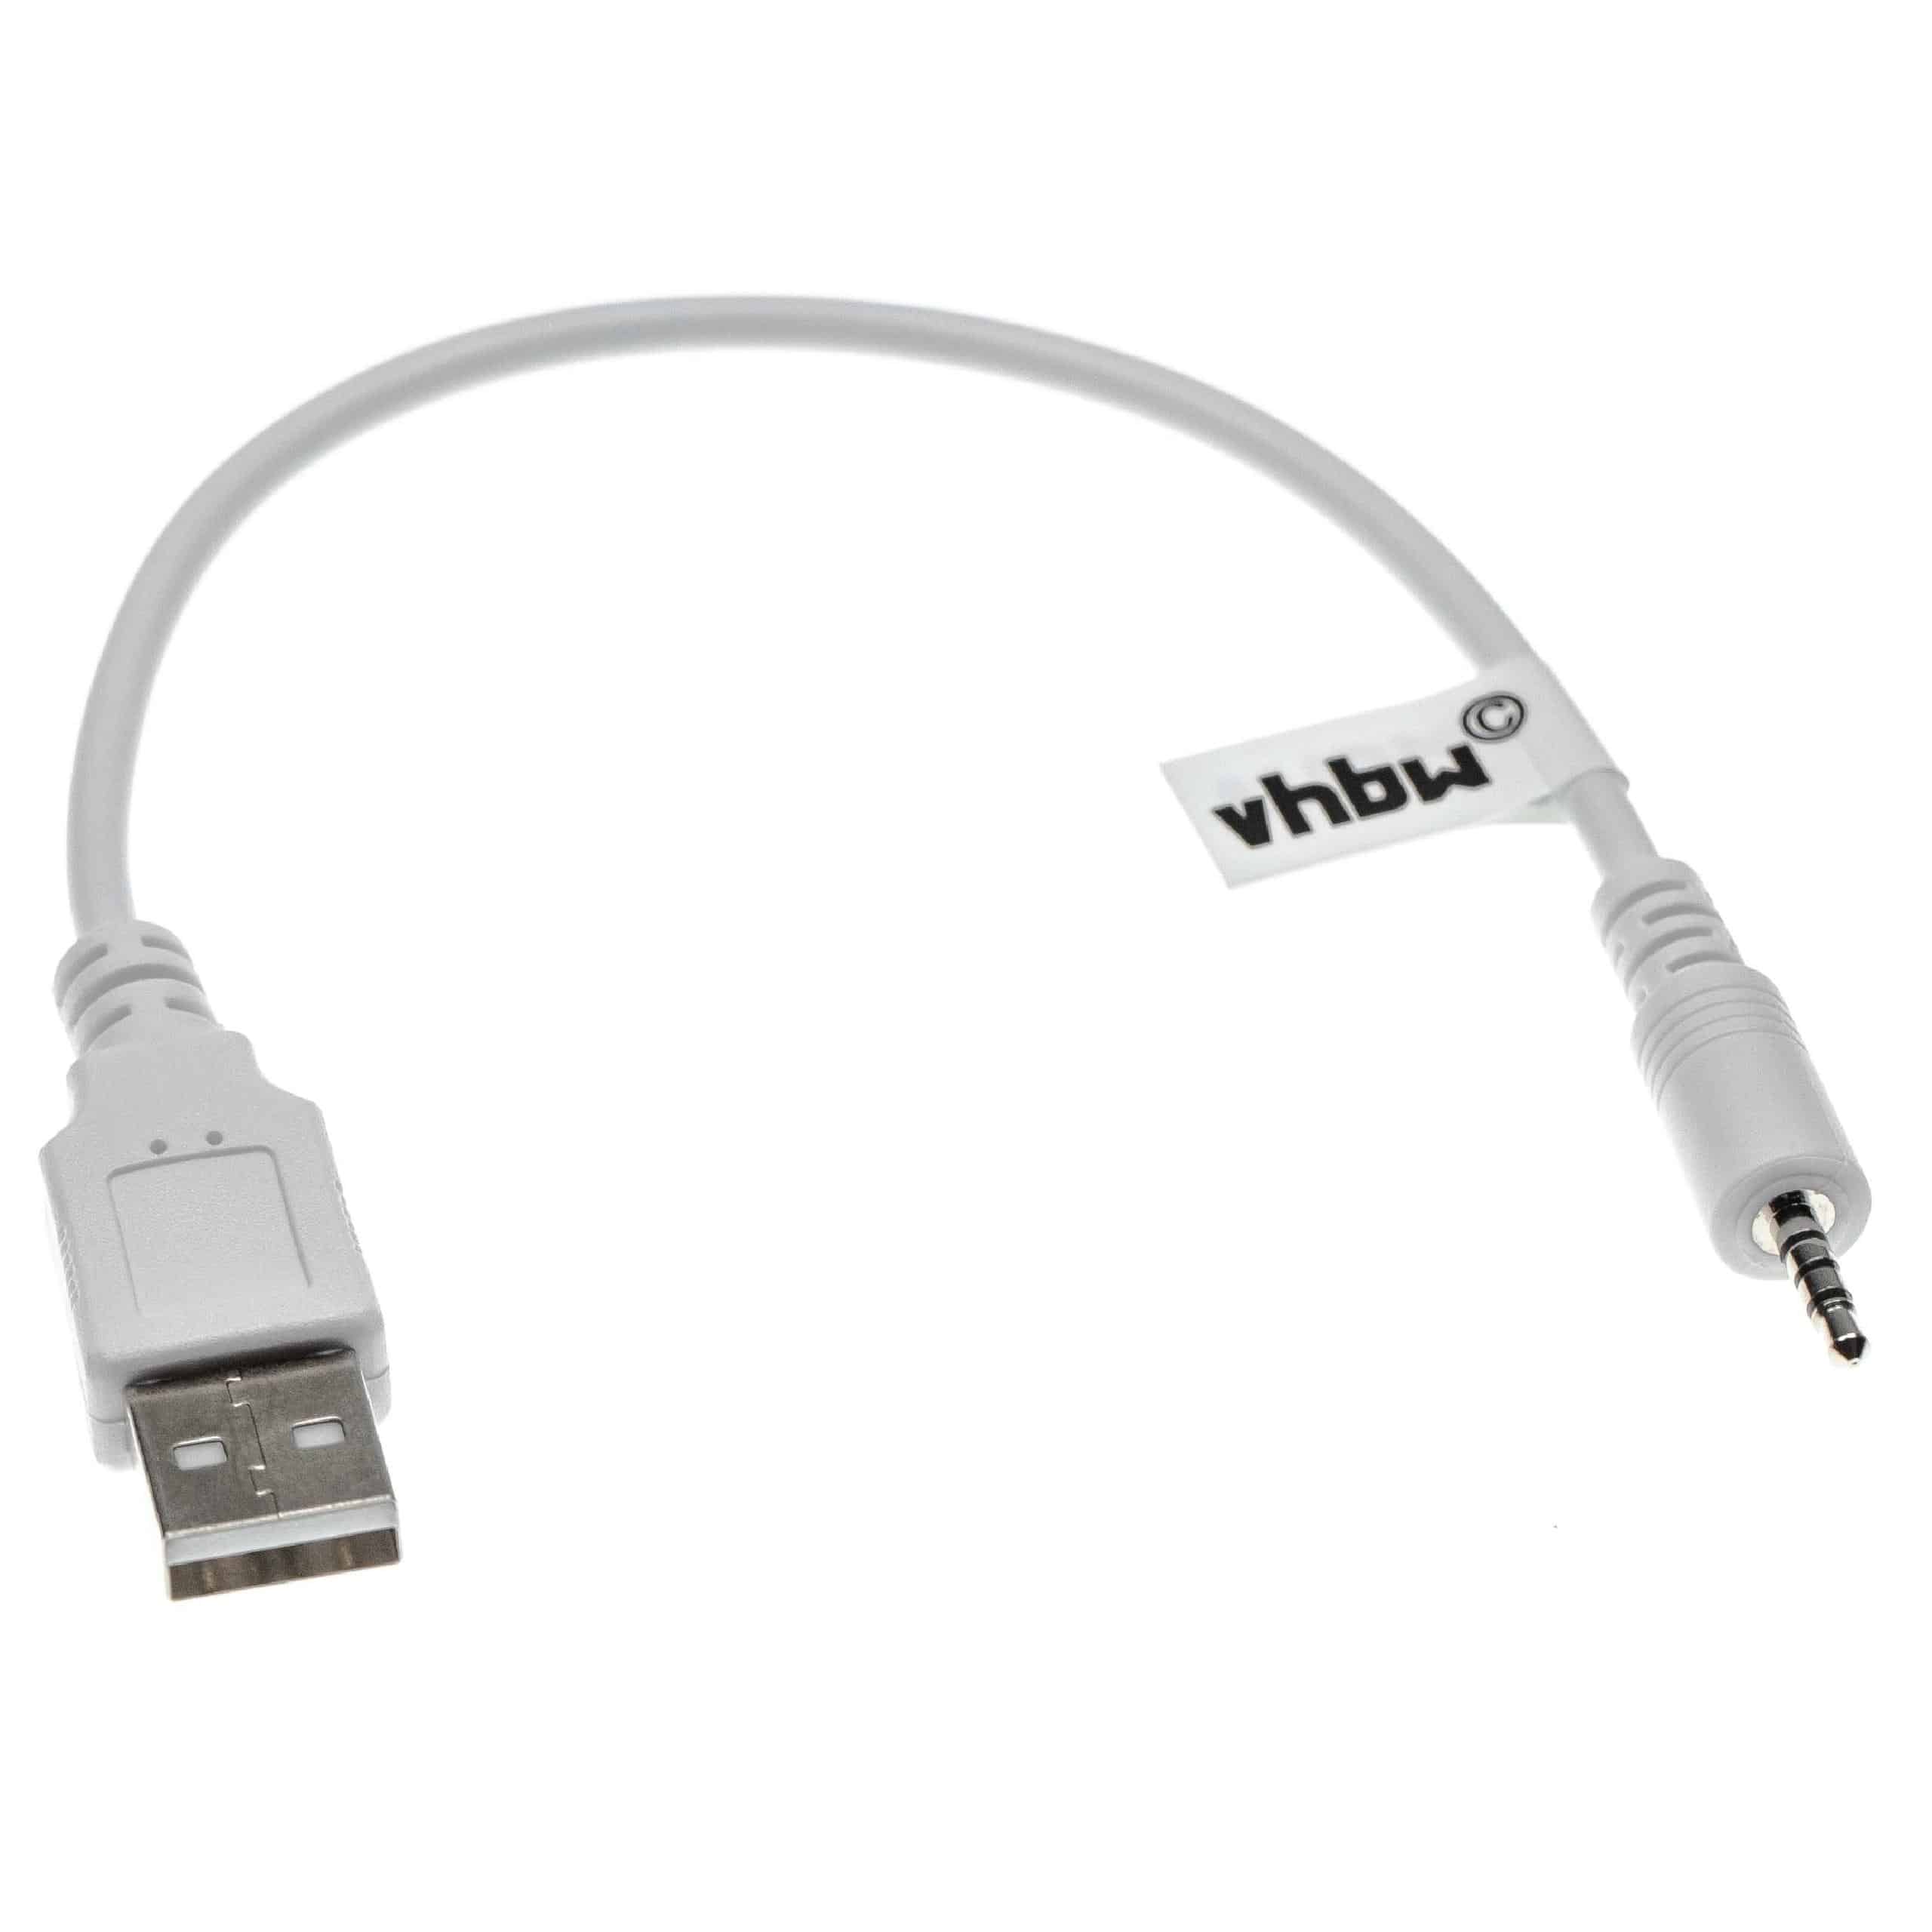 USB Charging Cable to 2.5 mm Audio Jack as Replacement for AKG / JBL / Harman Kardon K495NC Headphones etc., W